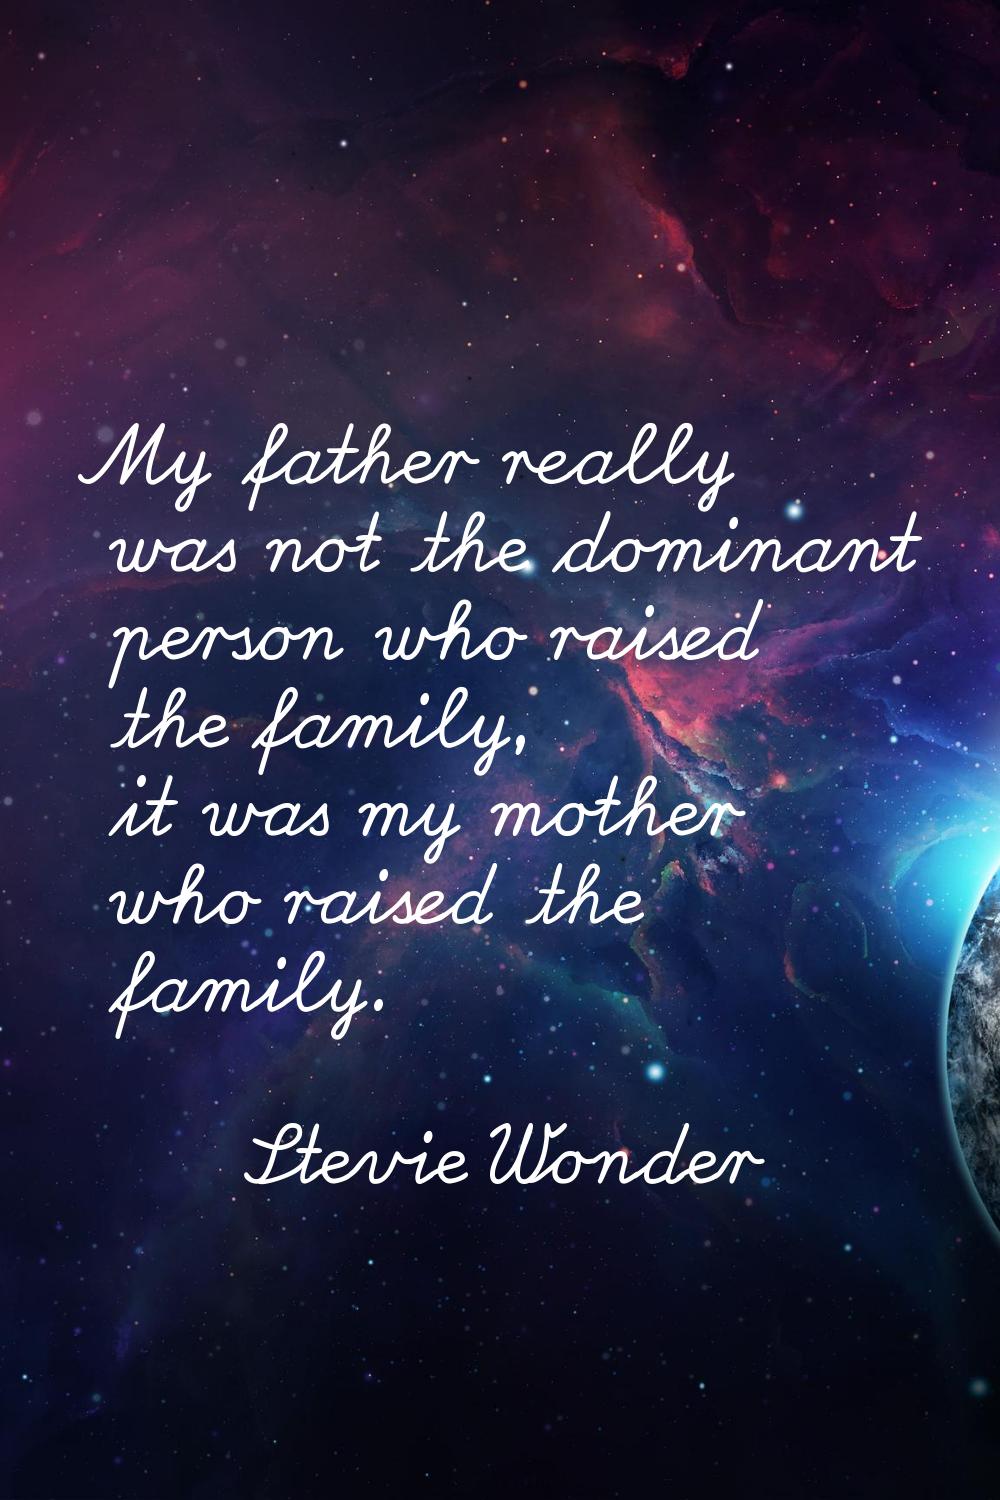 My father really was not the dominant person who raised the family, it was my mother who raised the